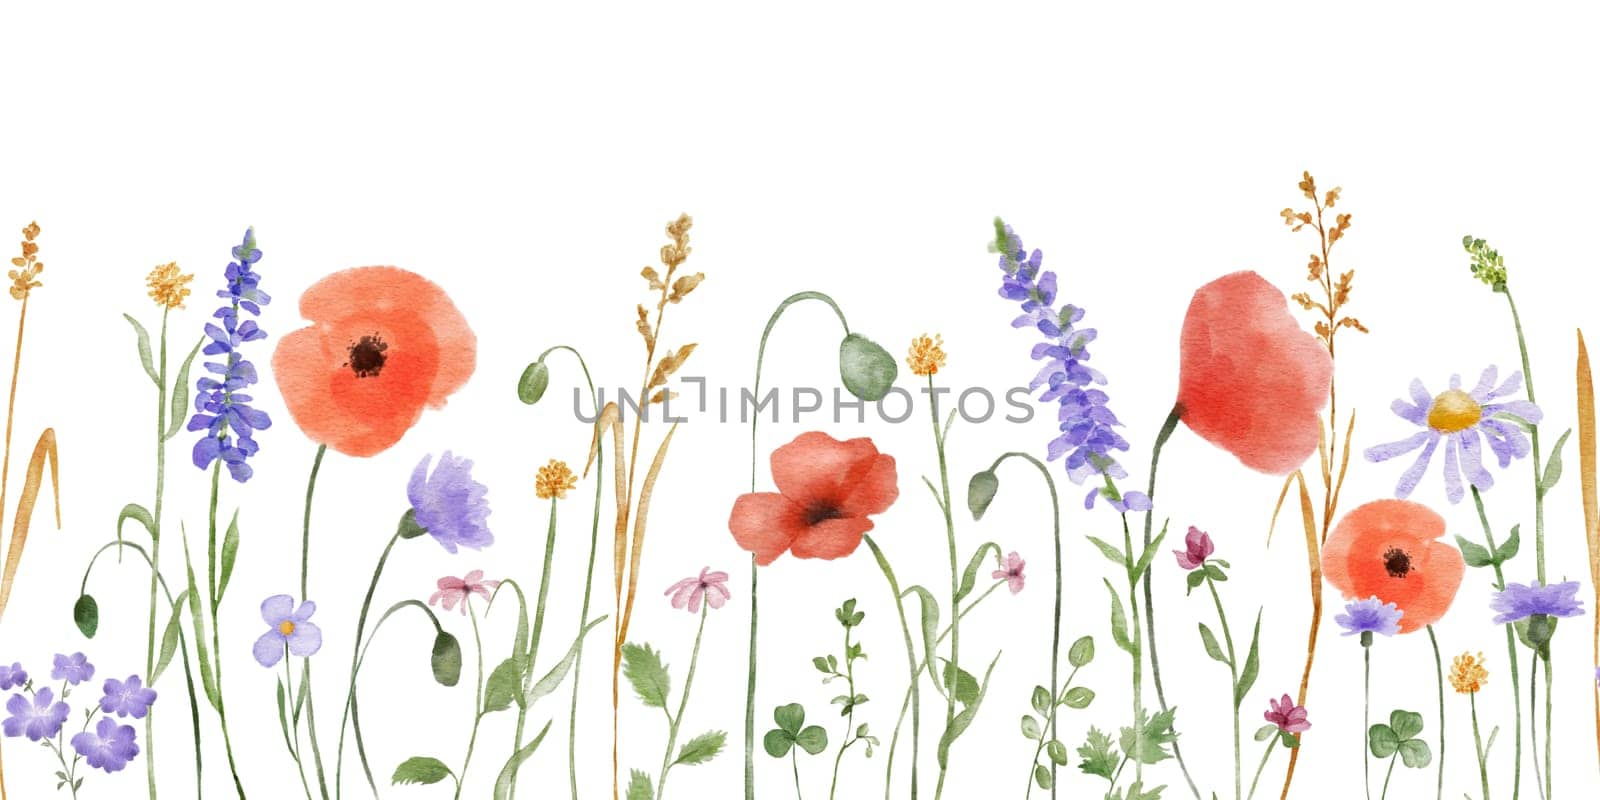 Watercolor floral seamless pattern with wildflowers, plants, leaves and herbs. Horizontal endless border with poppies and lavender isolated on white.